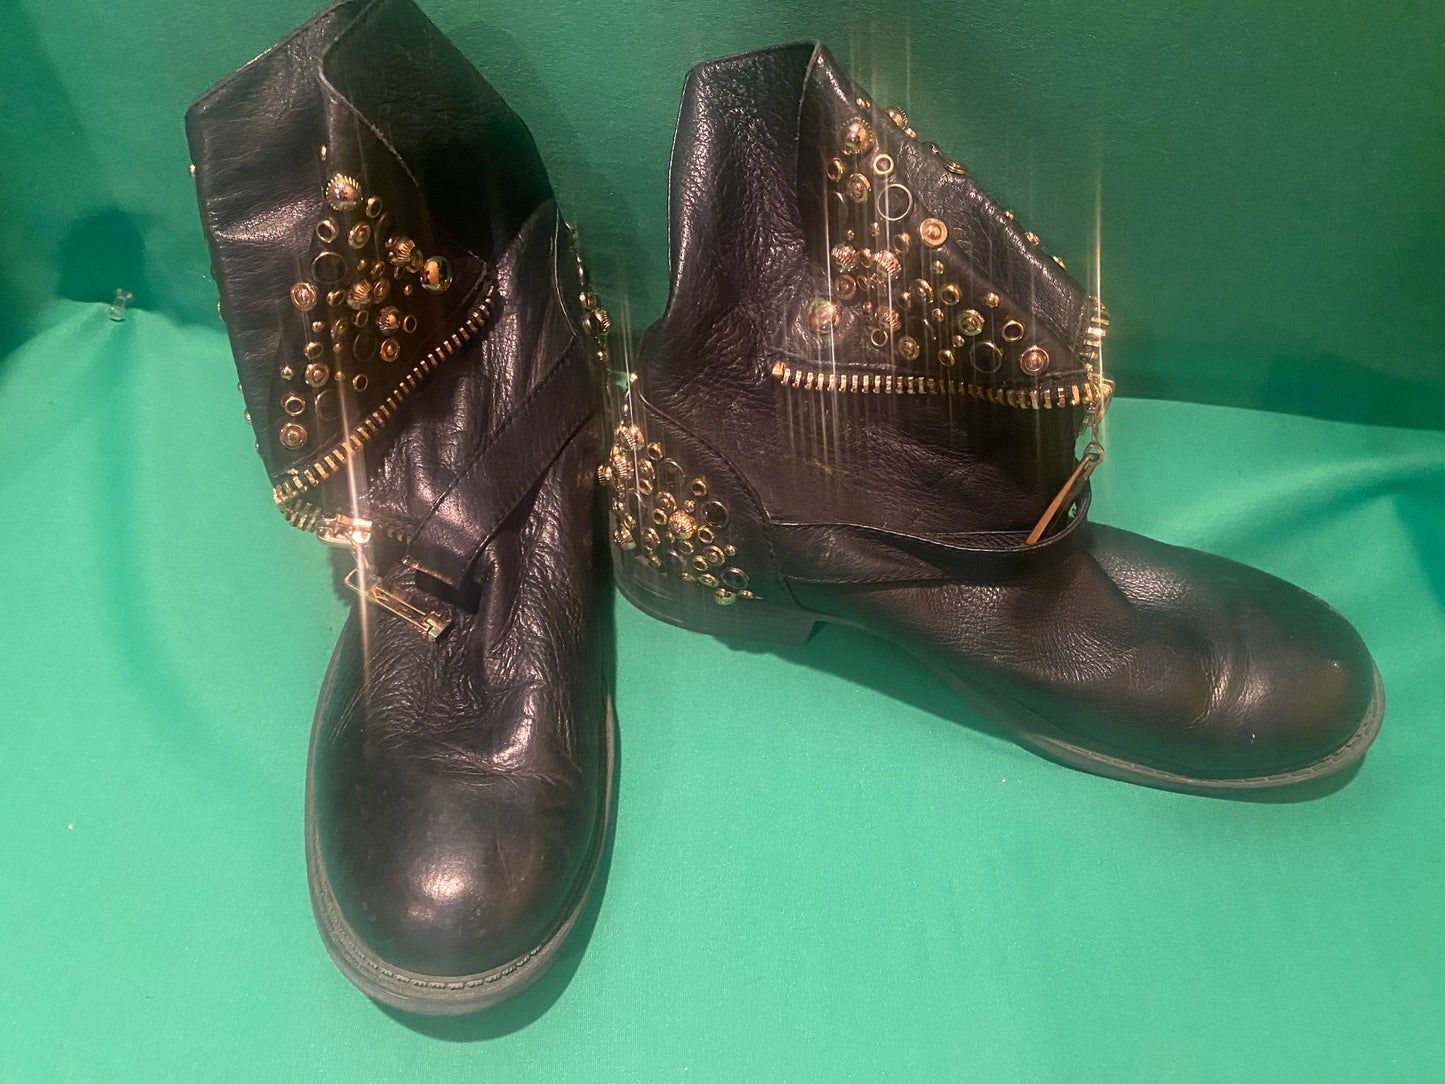 Shoes Boot Midsize Black with Silver Decor Used